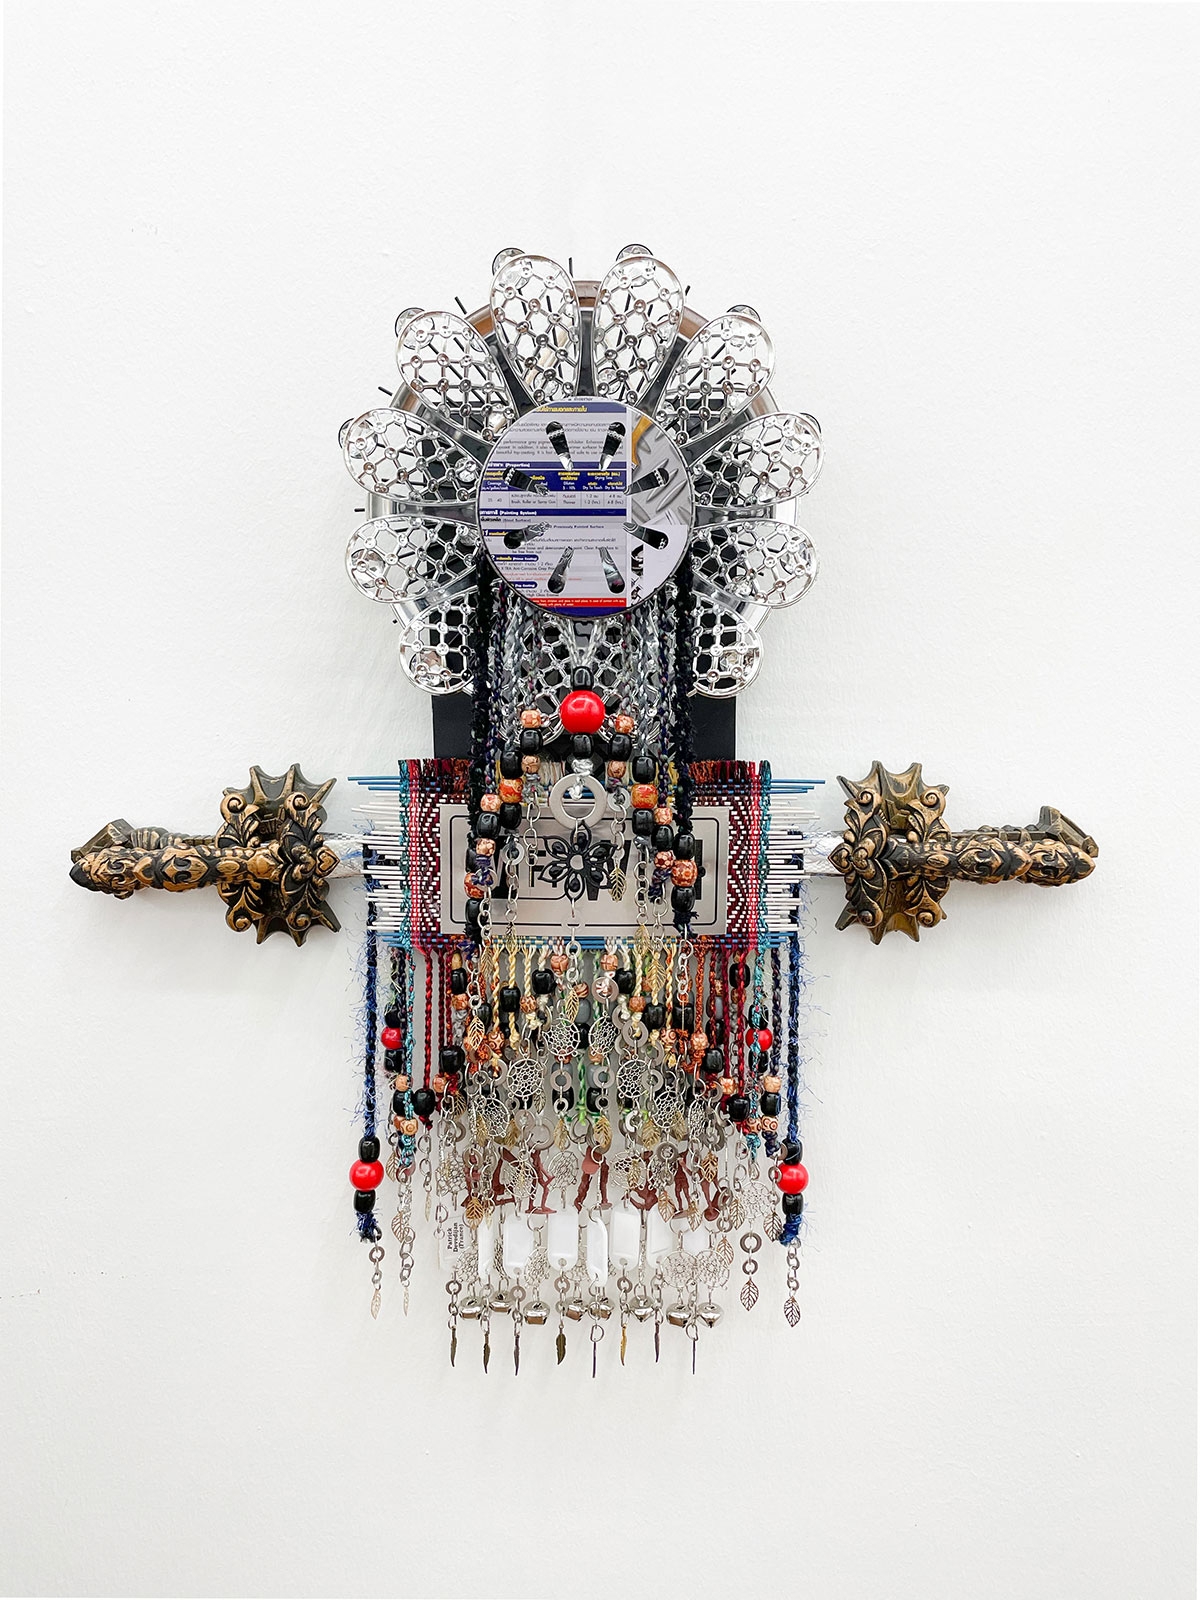 Hanging sculpture made from yarn, rakes, woven belts, beads, and metal and plastic ornaments